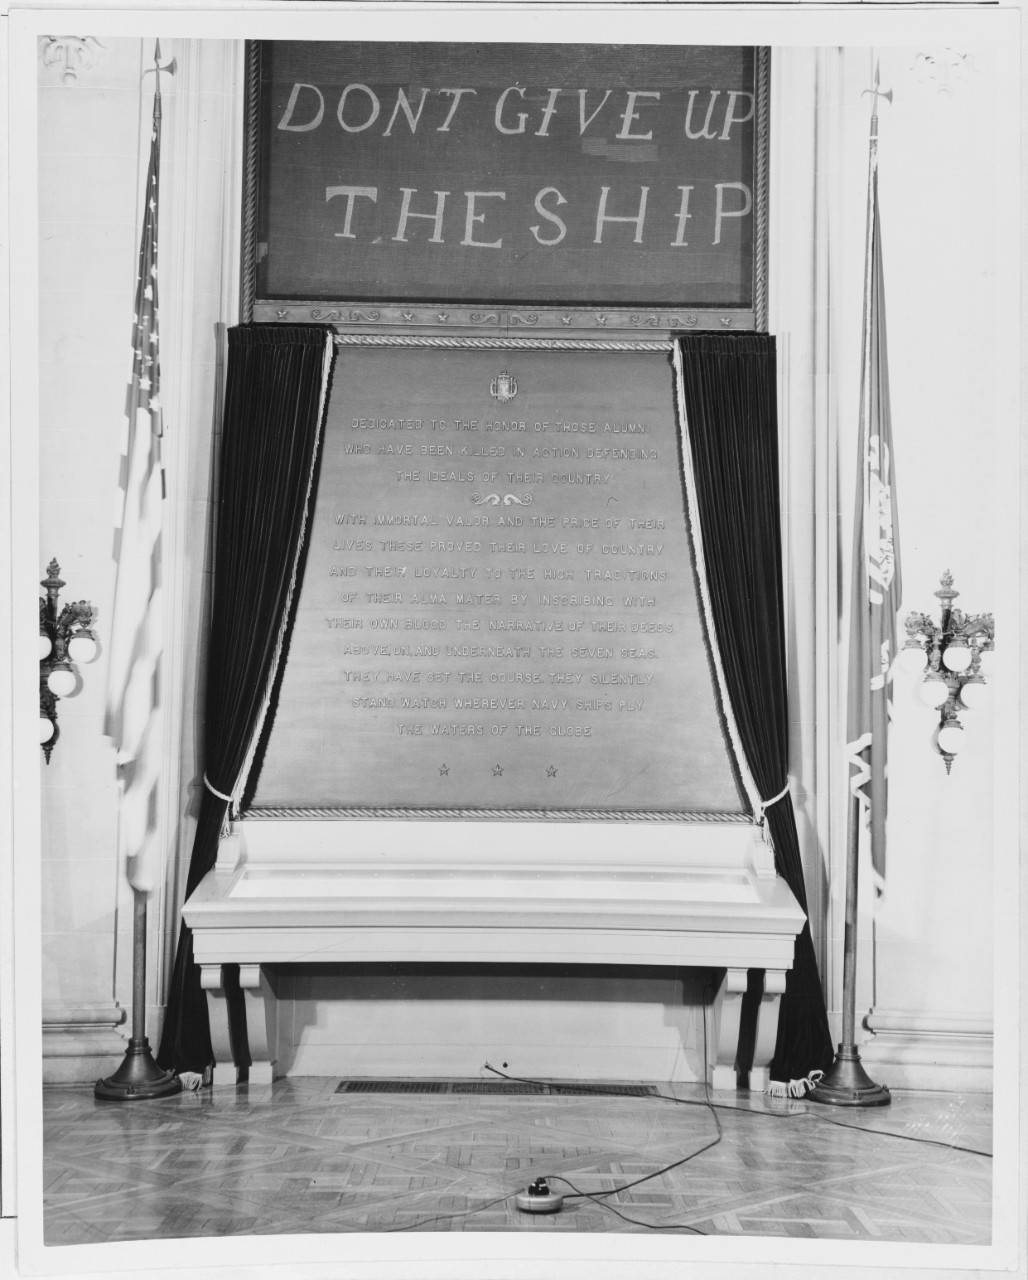 Jay Memorial in Memorial Hall at U.S. Naval Academy. John Paul Jones Flag - "Don't Give Up The Ship"